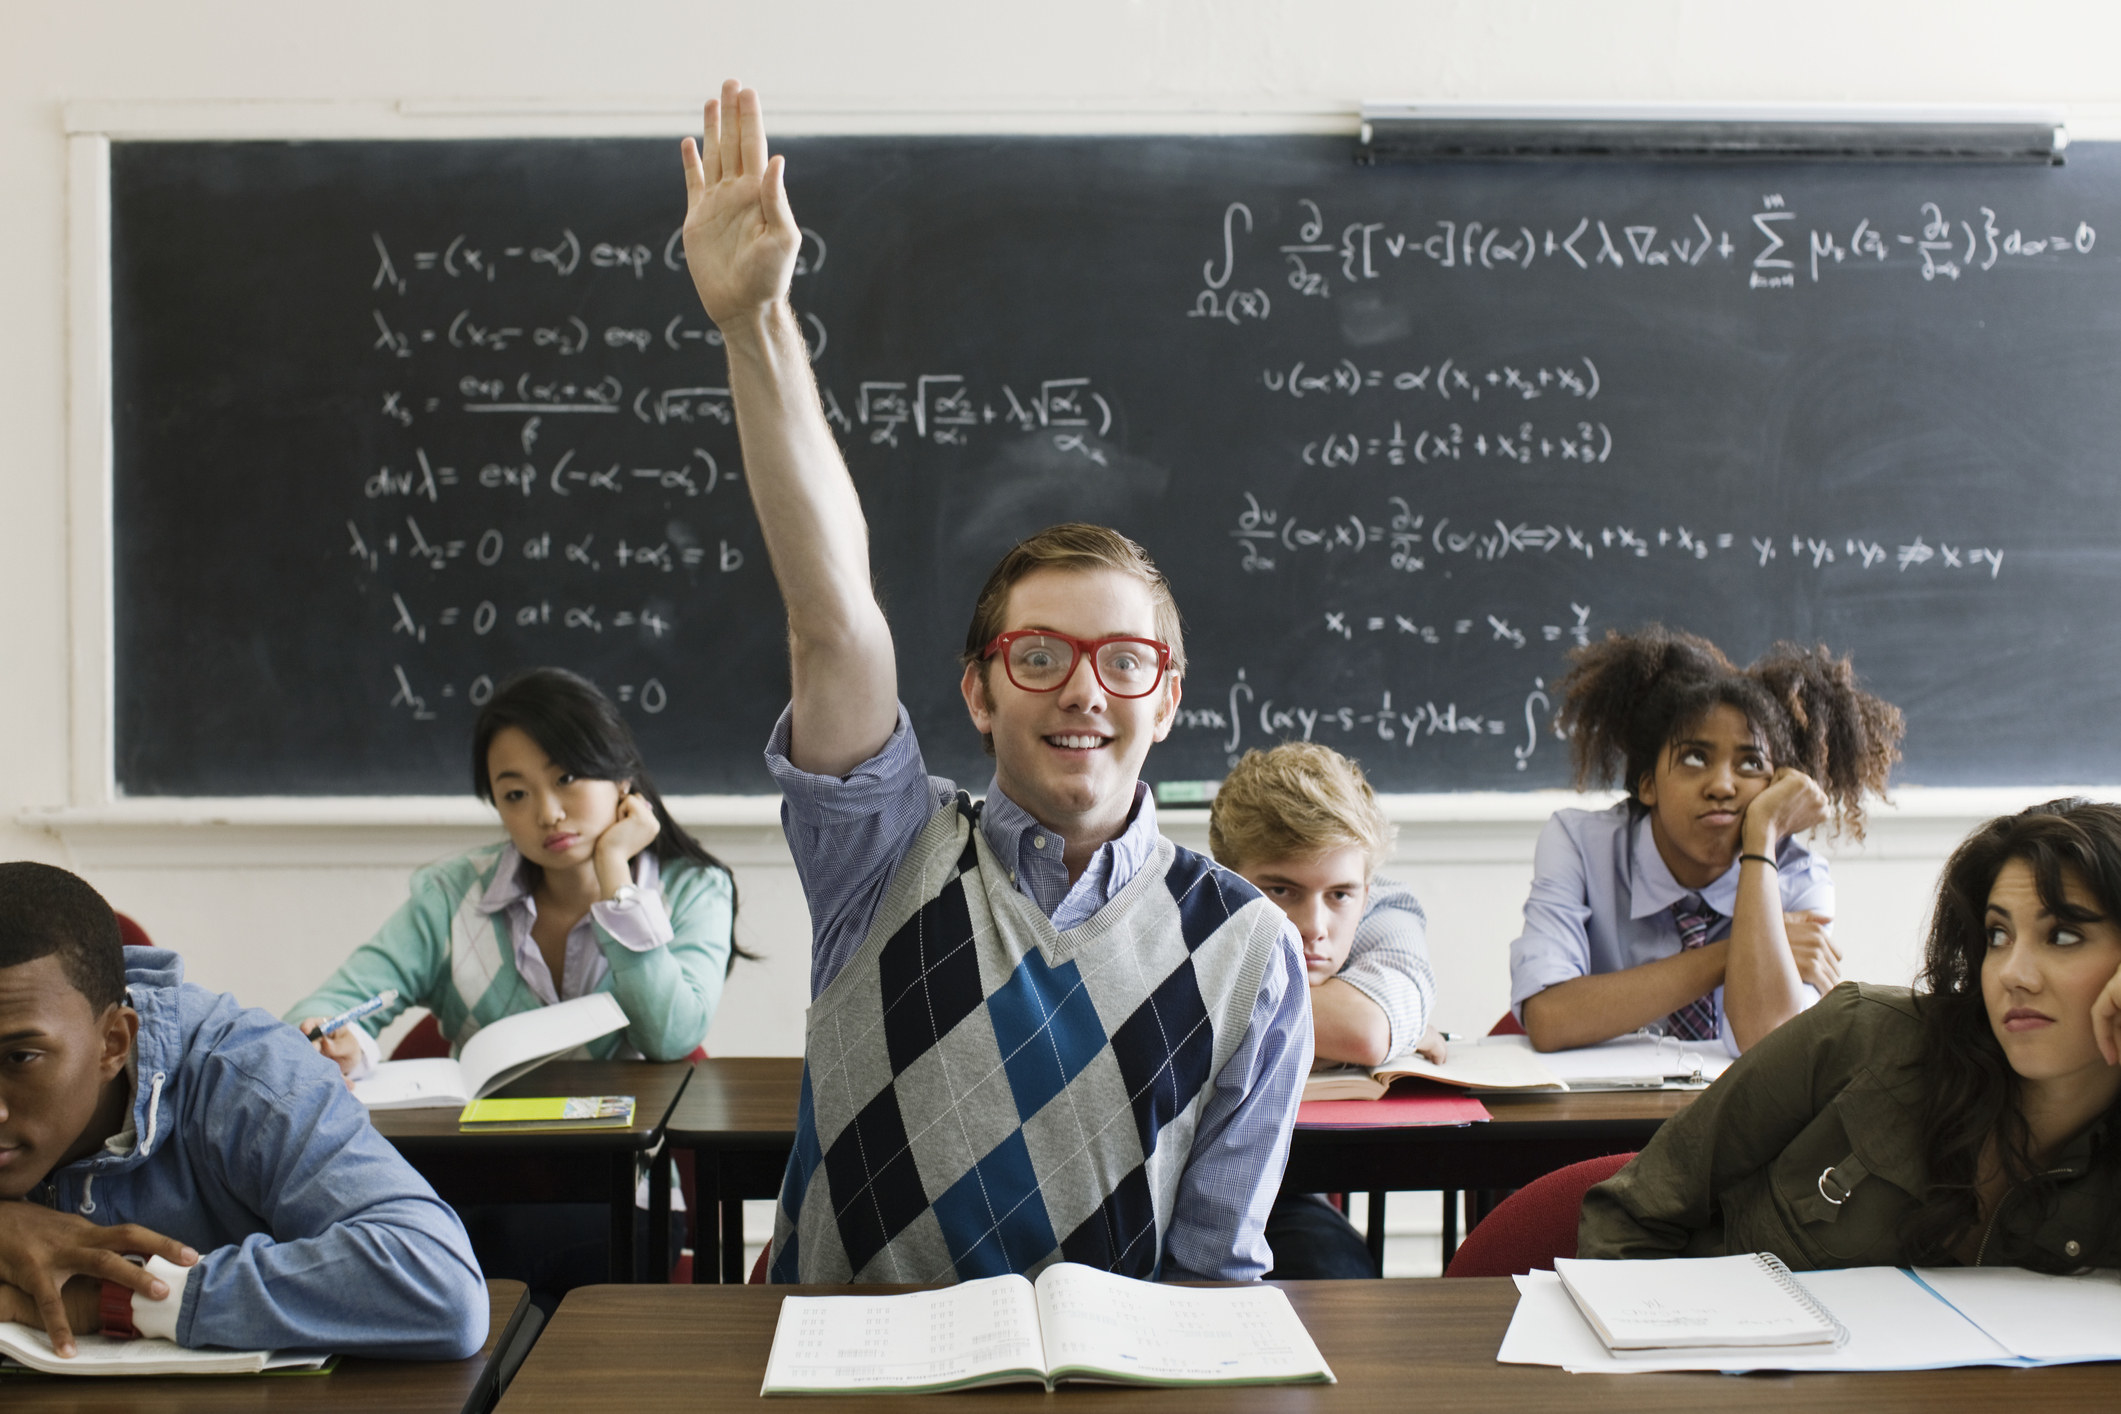 man raising his hand eagerly in class